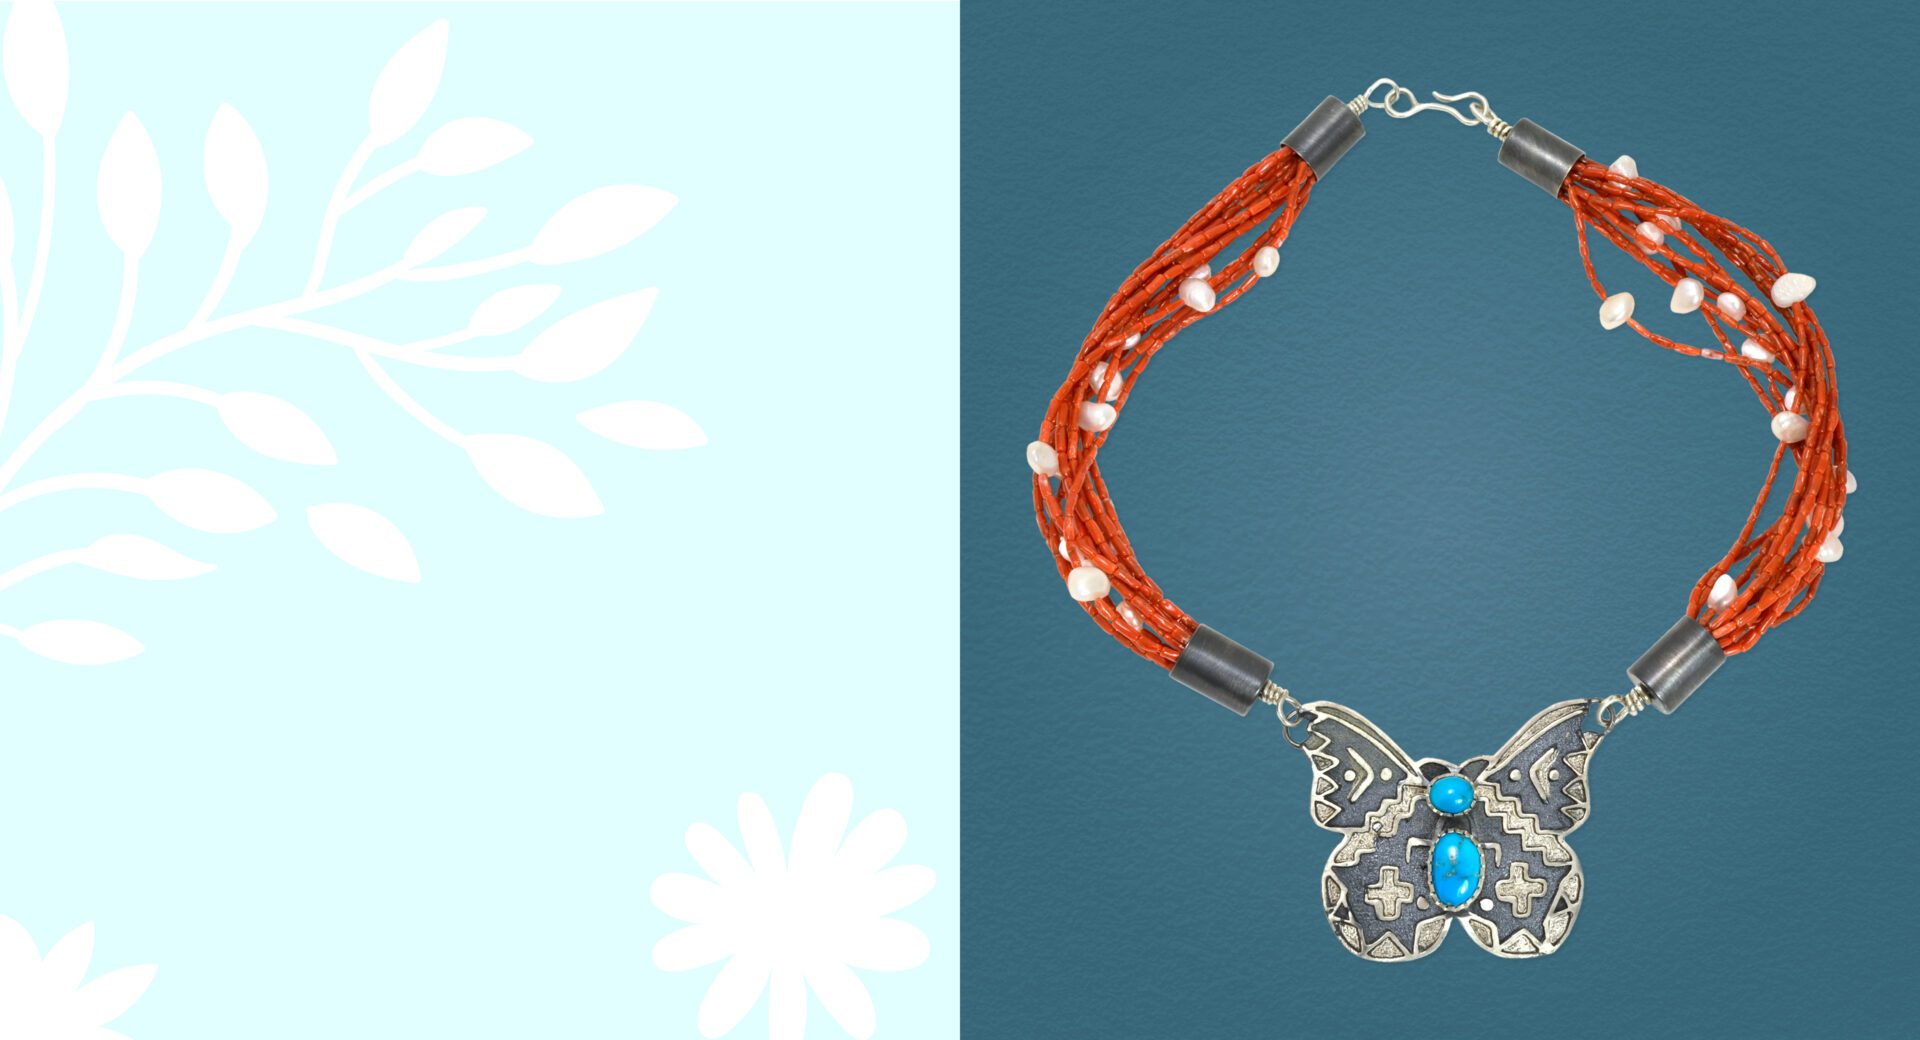 Orange beaded bracelet with a silver and blue pendant on a blue background with white floral patterns.